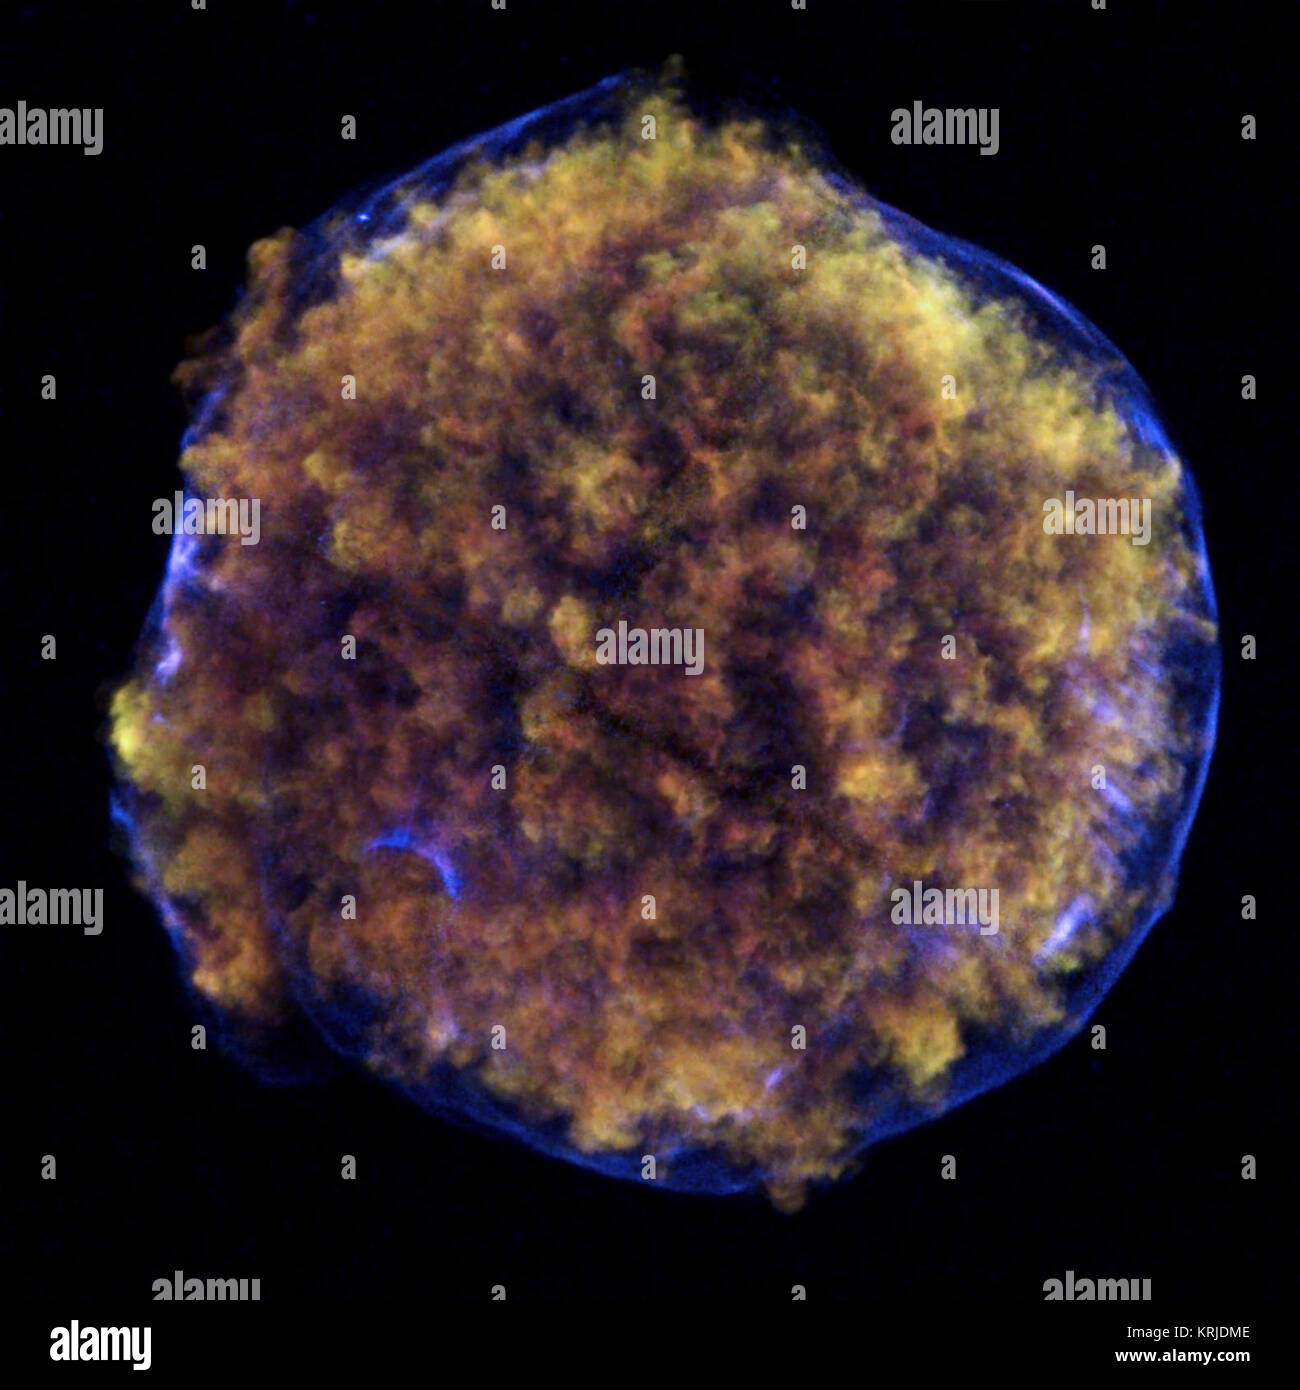 This Chandra image of the Tycho supernova remnant contains new evidence for what triggered the original supernova explosion.  Tycho was formed by a Type Ia supernova, a category of stellar explosion used in measuring astronomical distances because of their reliable brightness.  In the lower left region of Tycho is a blue arc of X-ray emission. Several lines of evidence support the conclusion that this arc is due to a shock wave created when a white dwarf exploded and blew material off the surface of a nearby companion star.  This supports one popular scenario for the trigger of a Type Ia super Stock Photo